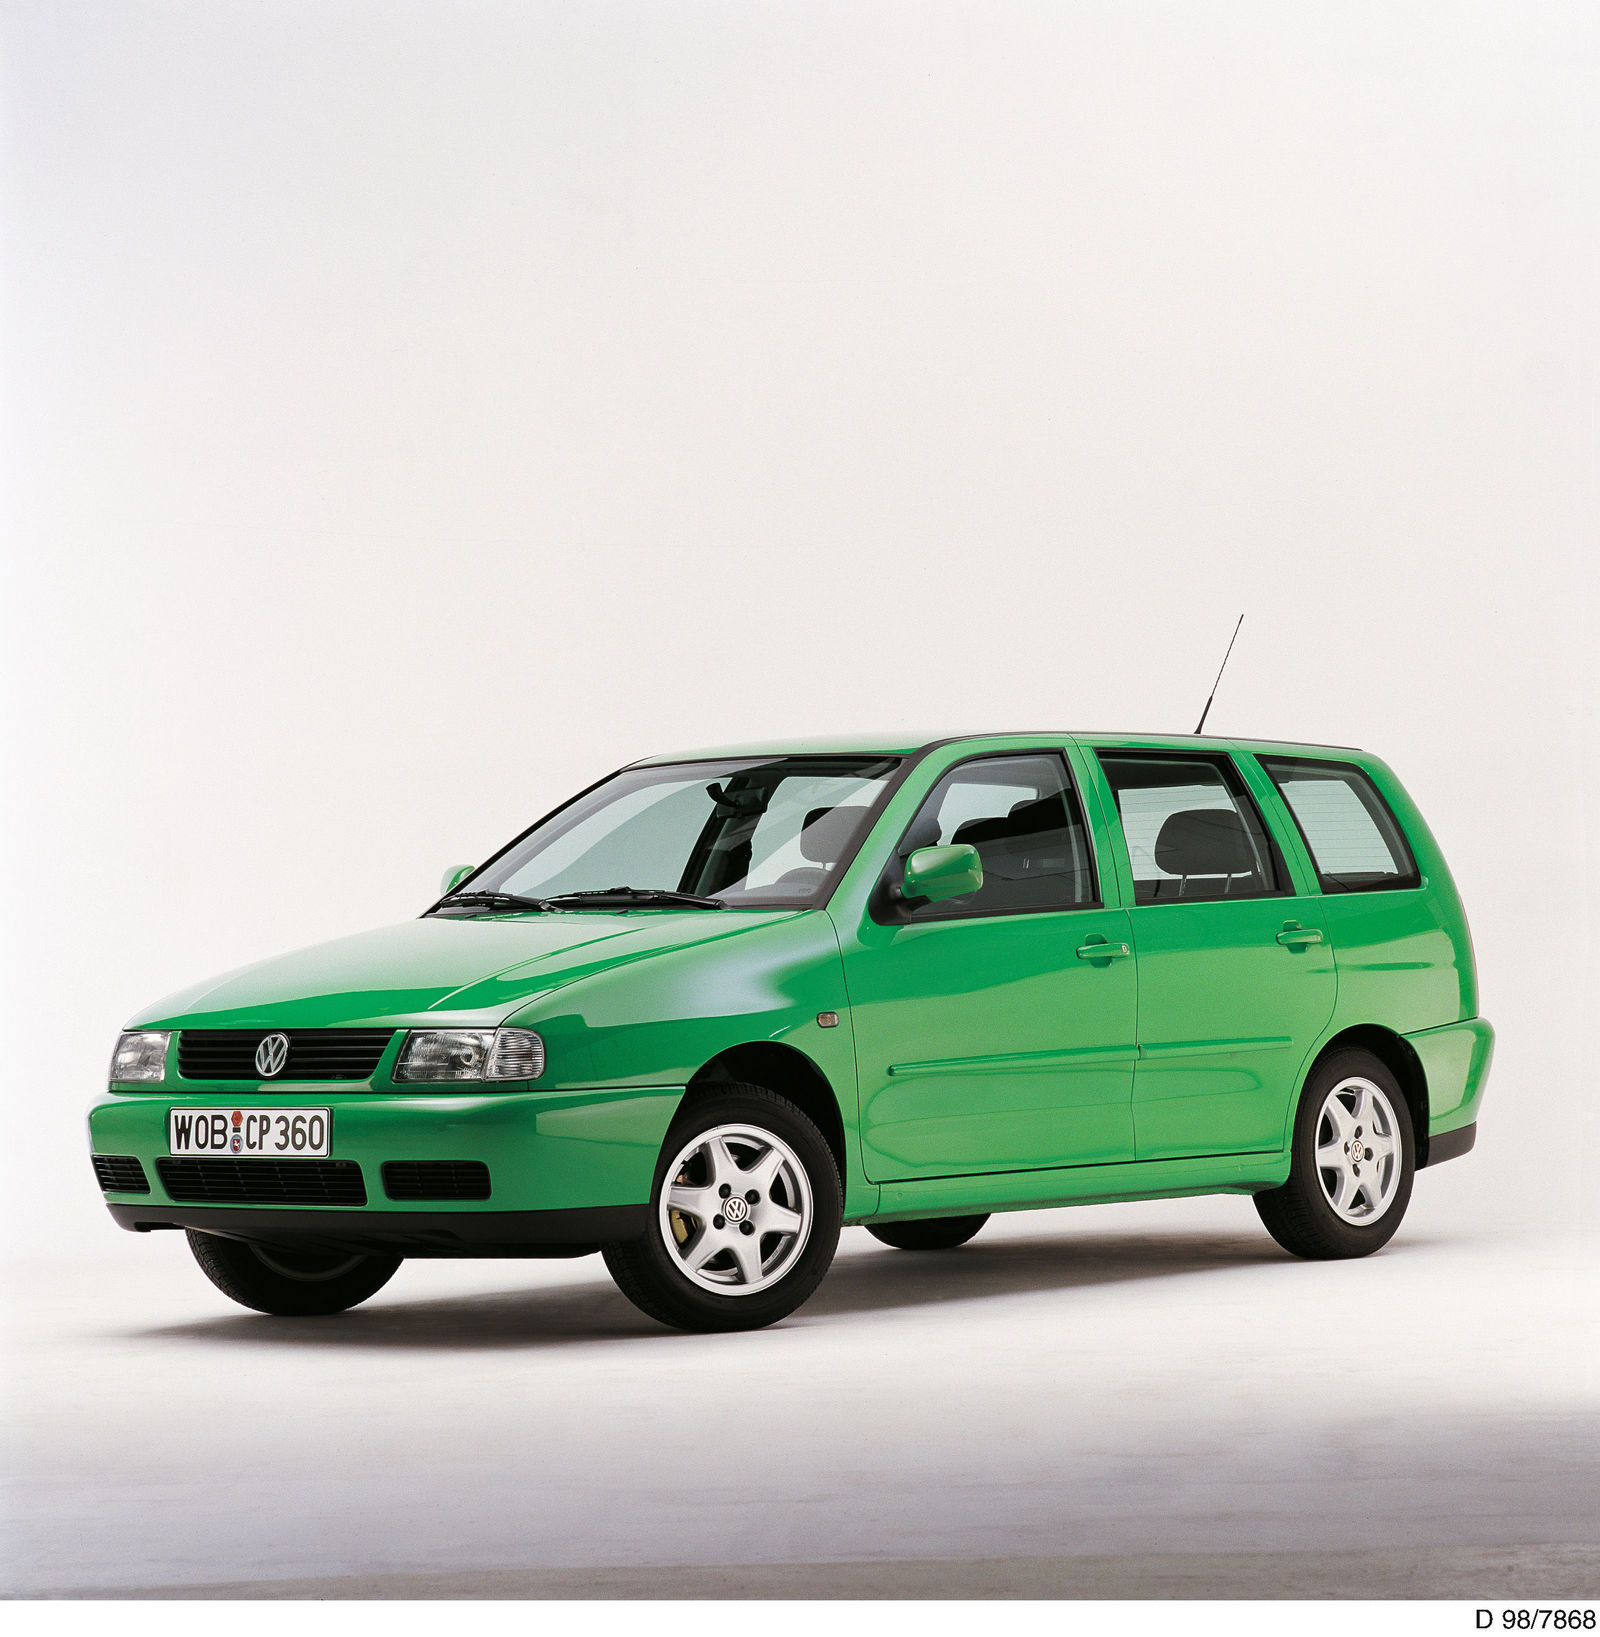 Product: Polo Variant (1998)